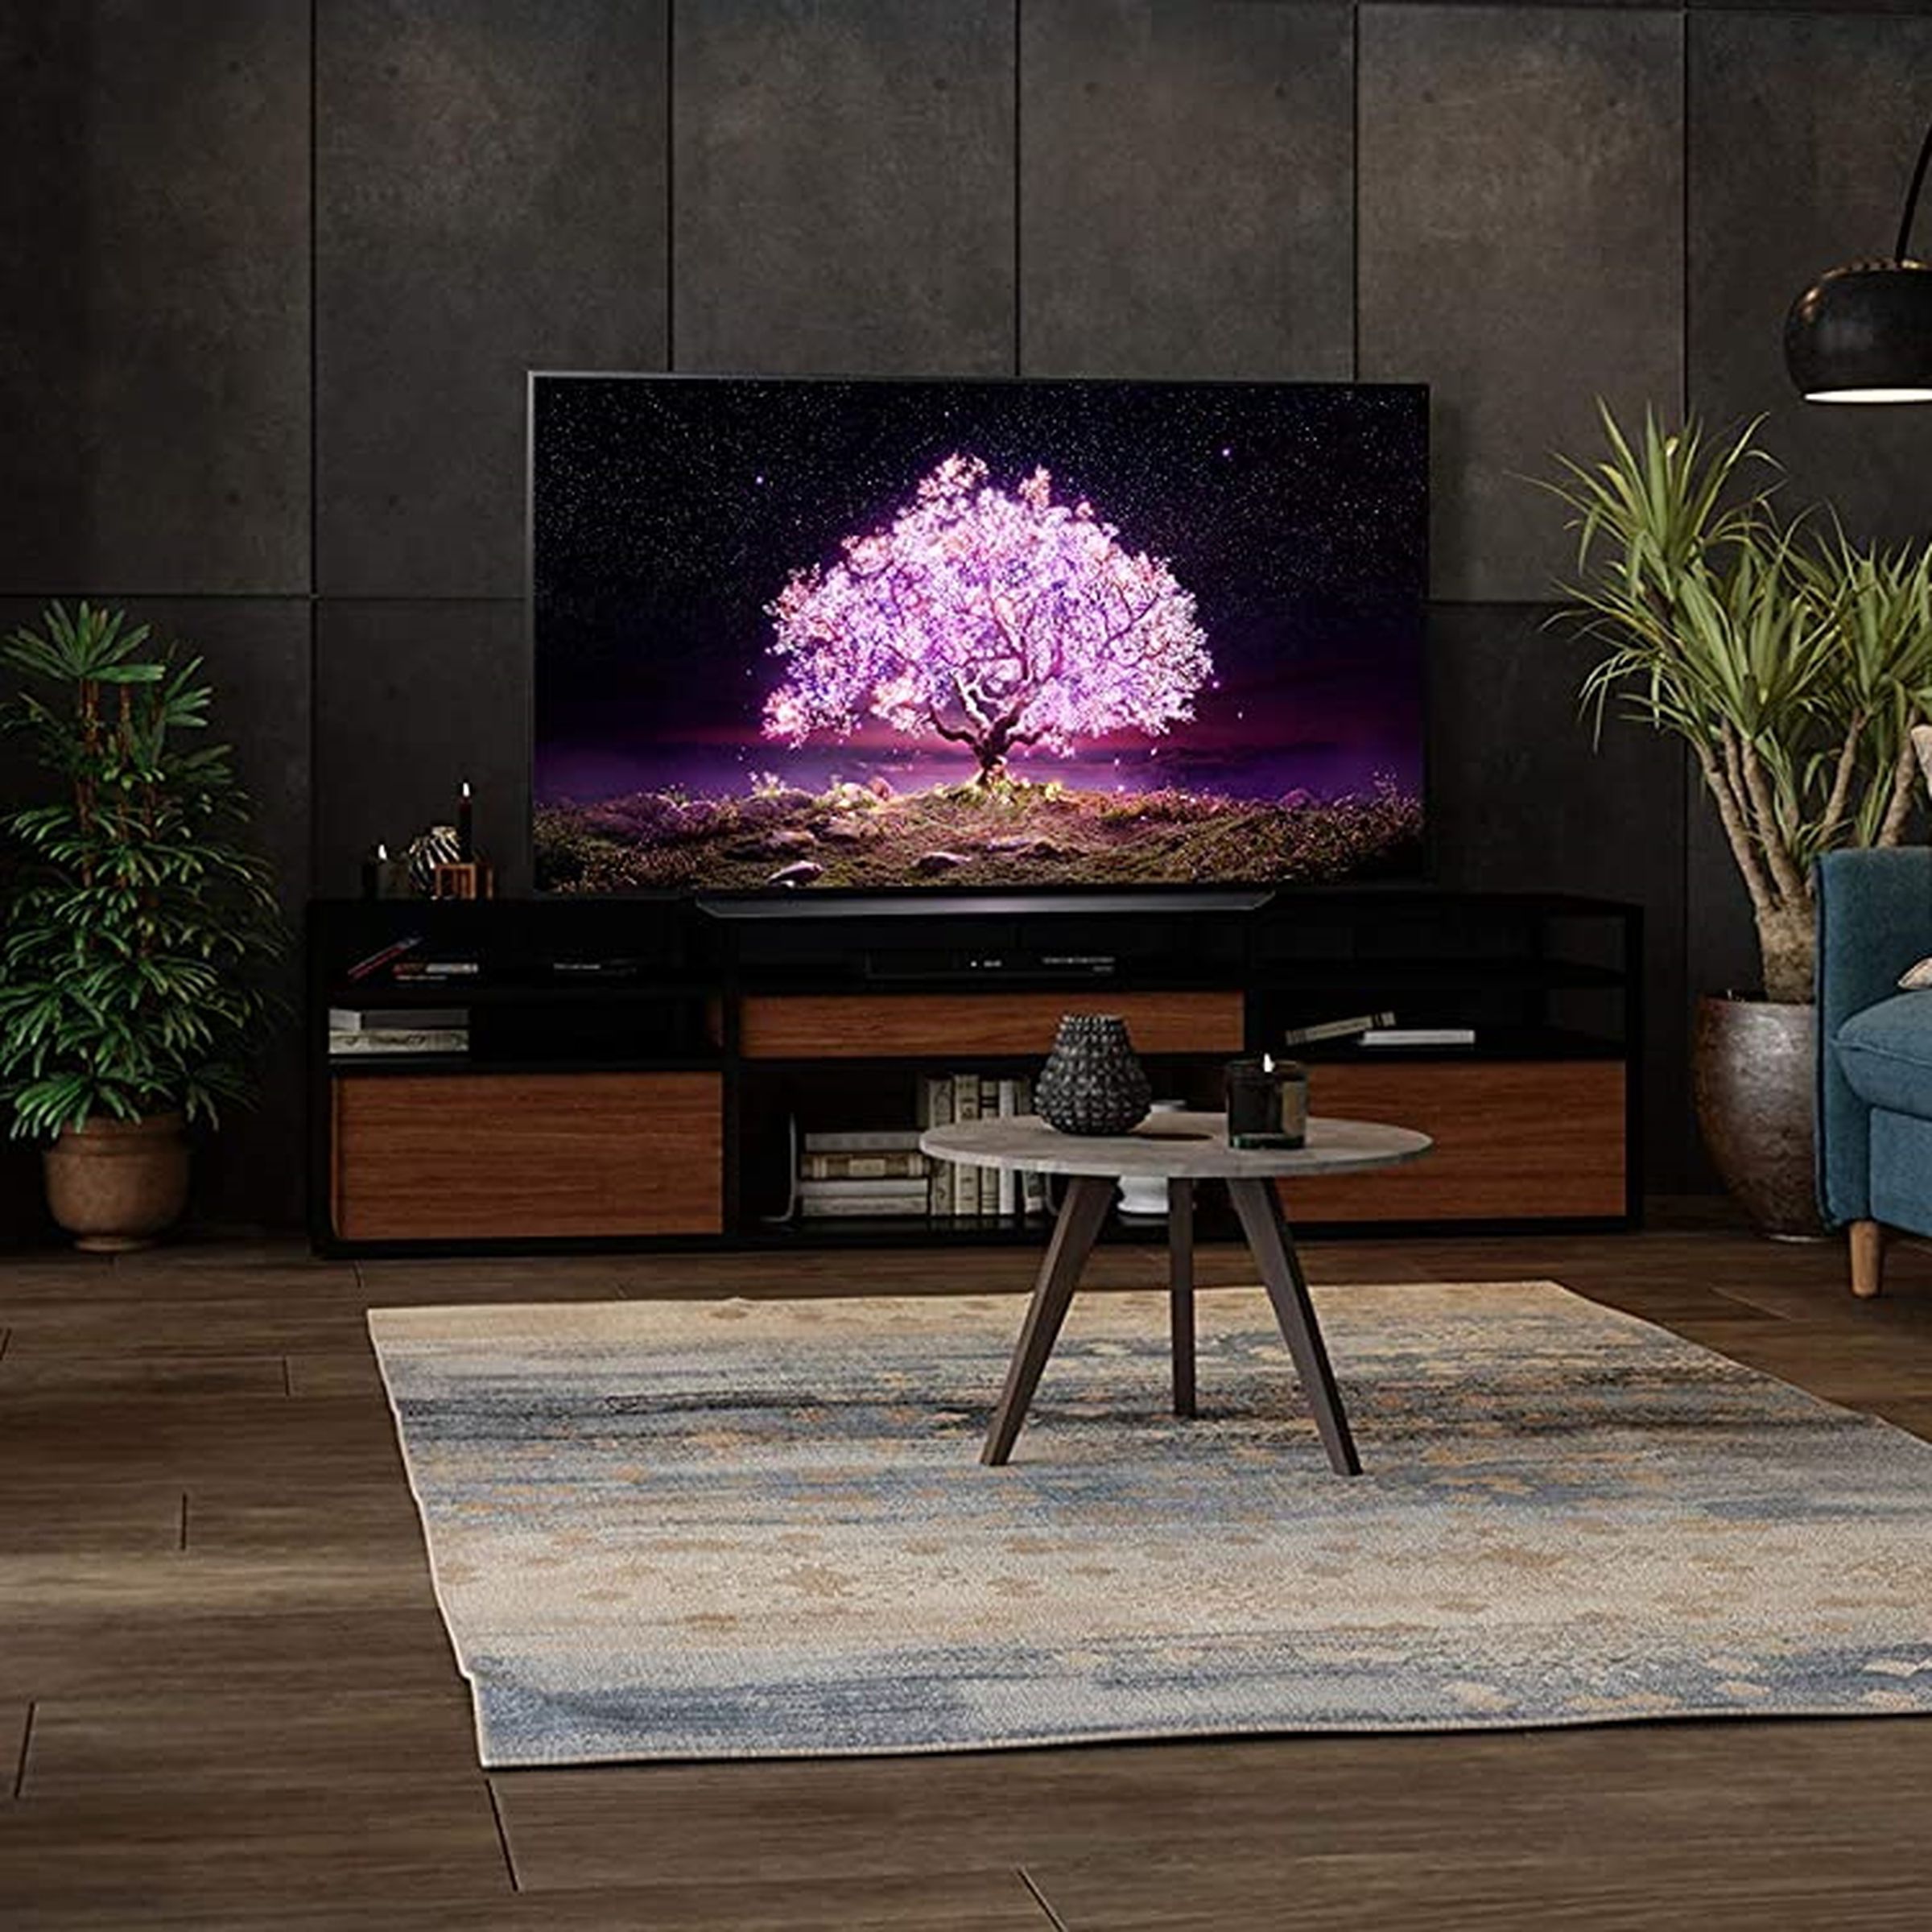 Another awesome discount on the LG C1 OLED TV.